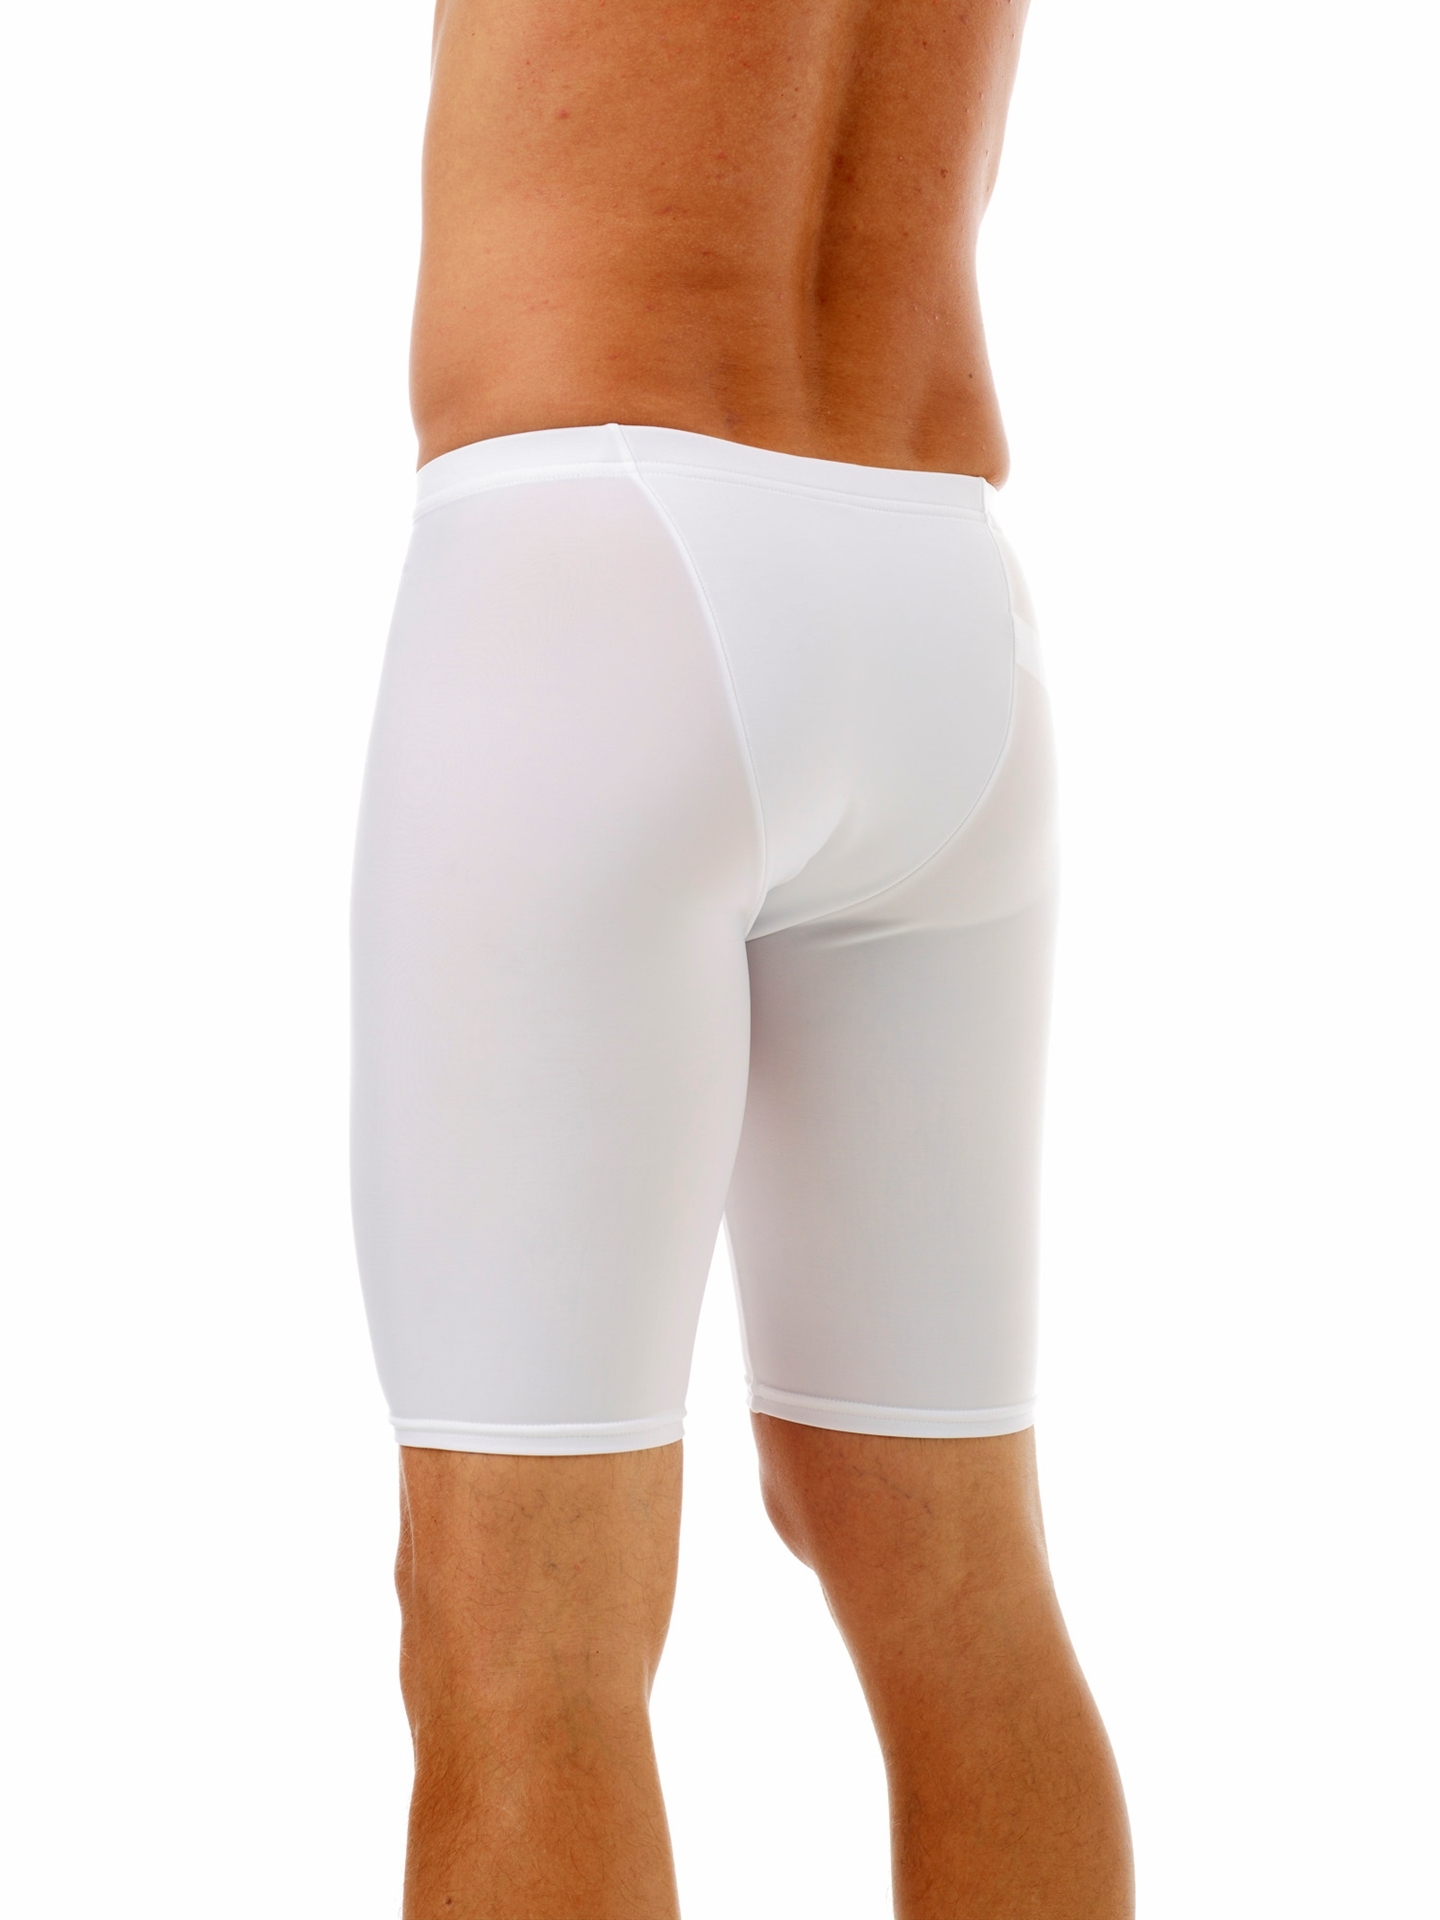 Underworks Mens Light Compression Padded Boxers - White - S